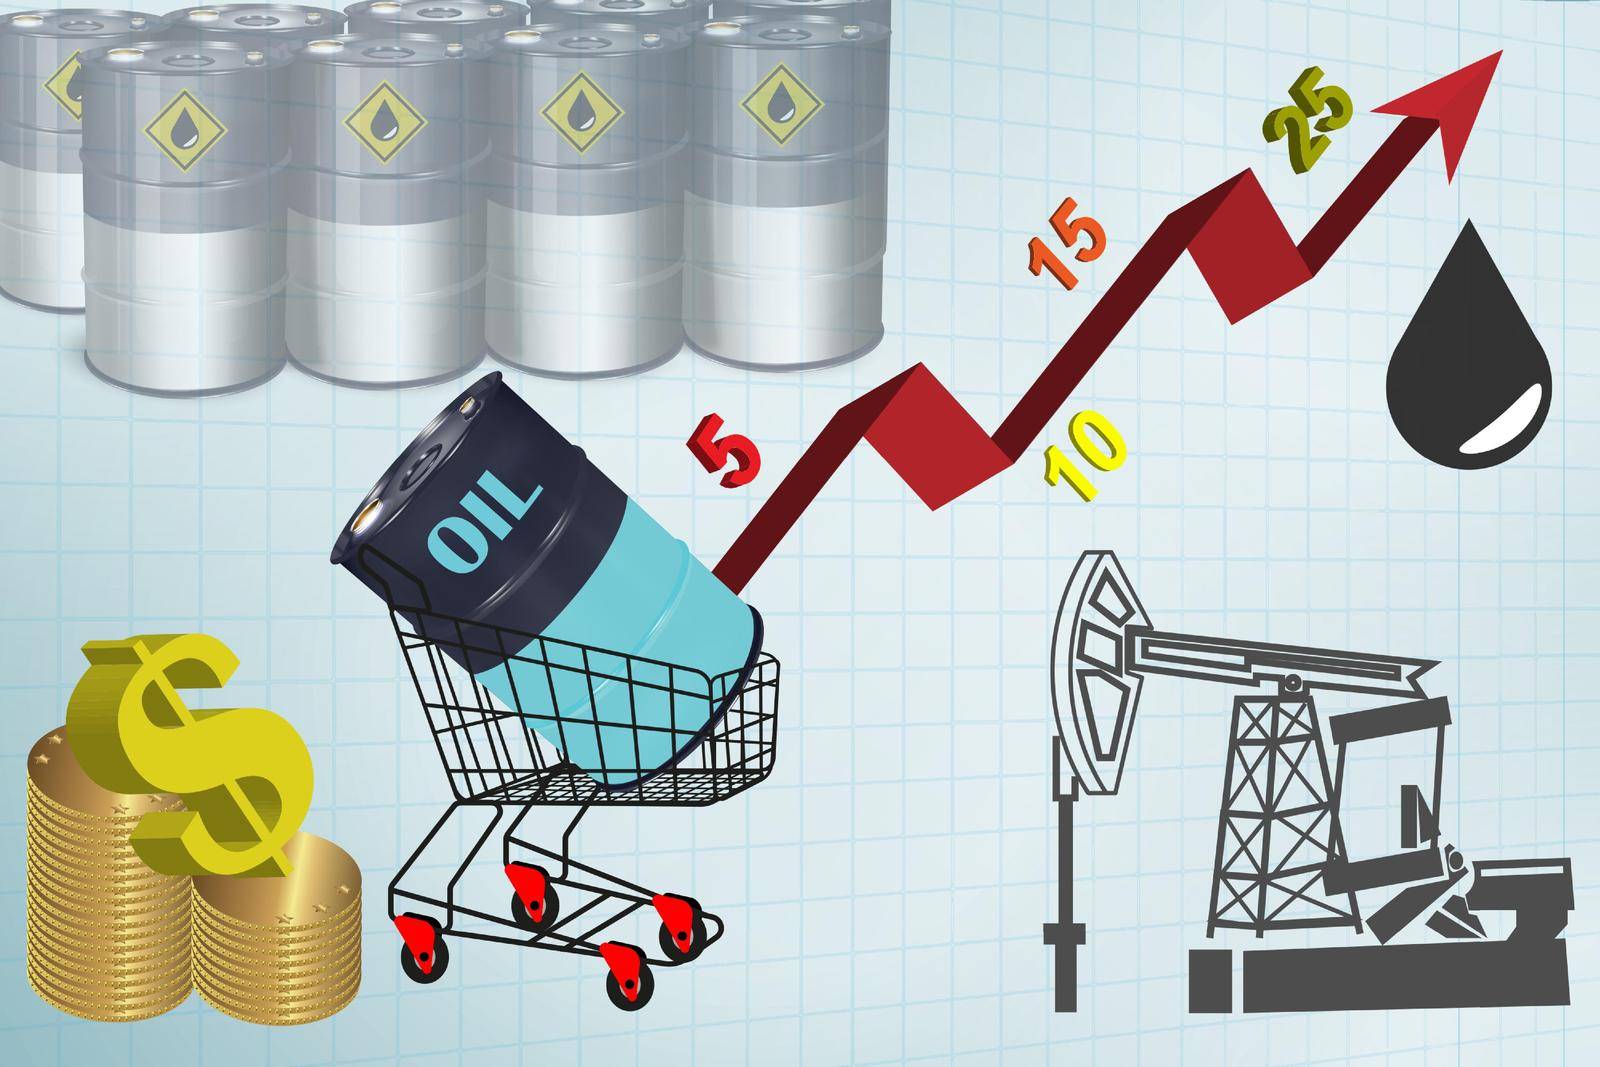 Oil barrel graph with red arrow pointing up. Vector illustration